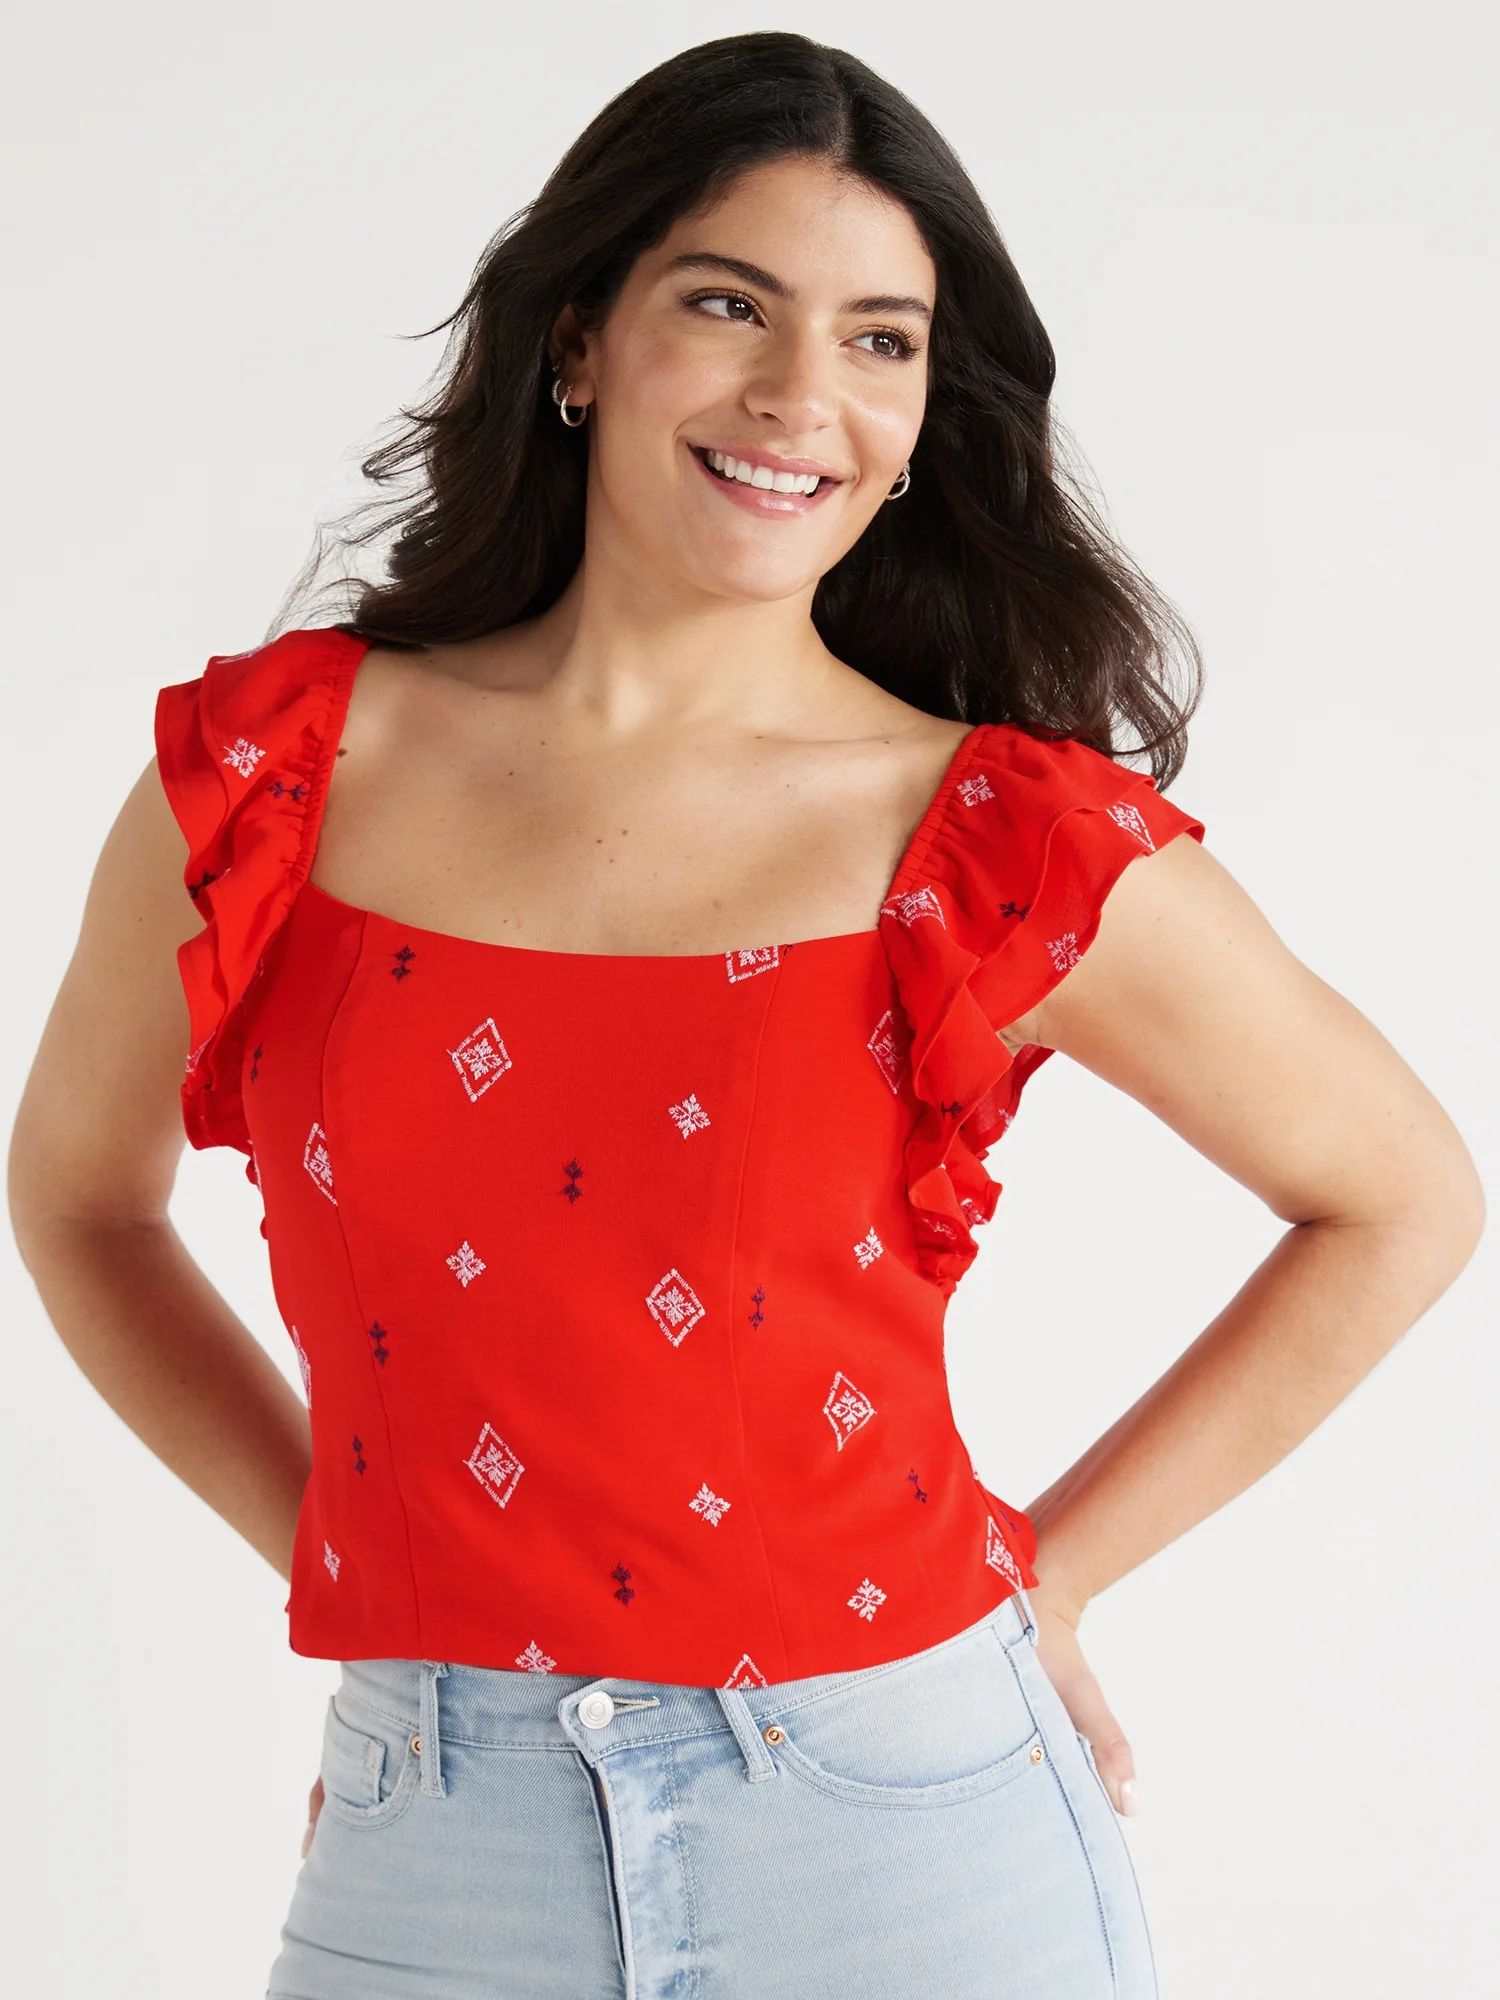 Sofia Jeans Women's and Women's Plus Double Ruffle Embroidered Top, Sizes XS-5X | Walmart (US)